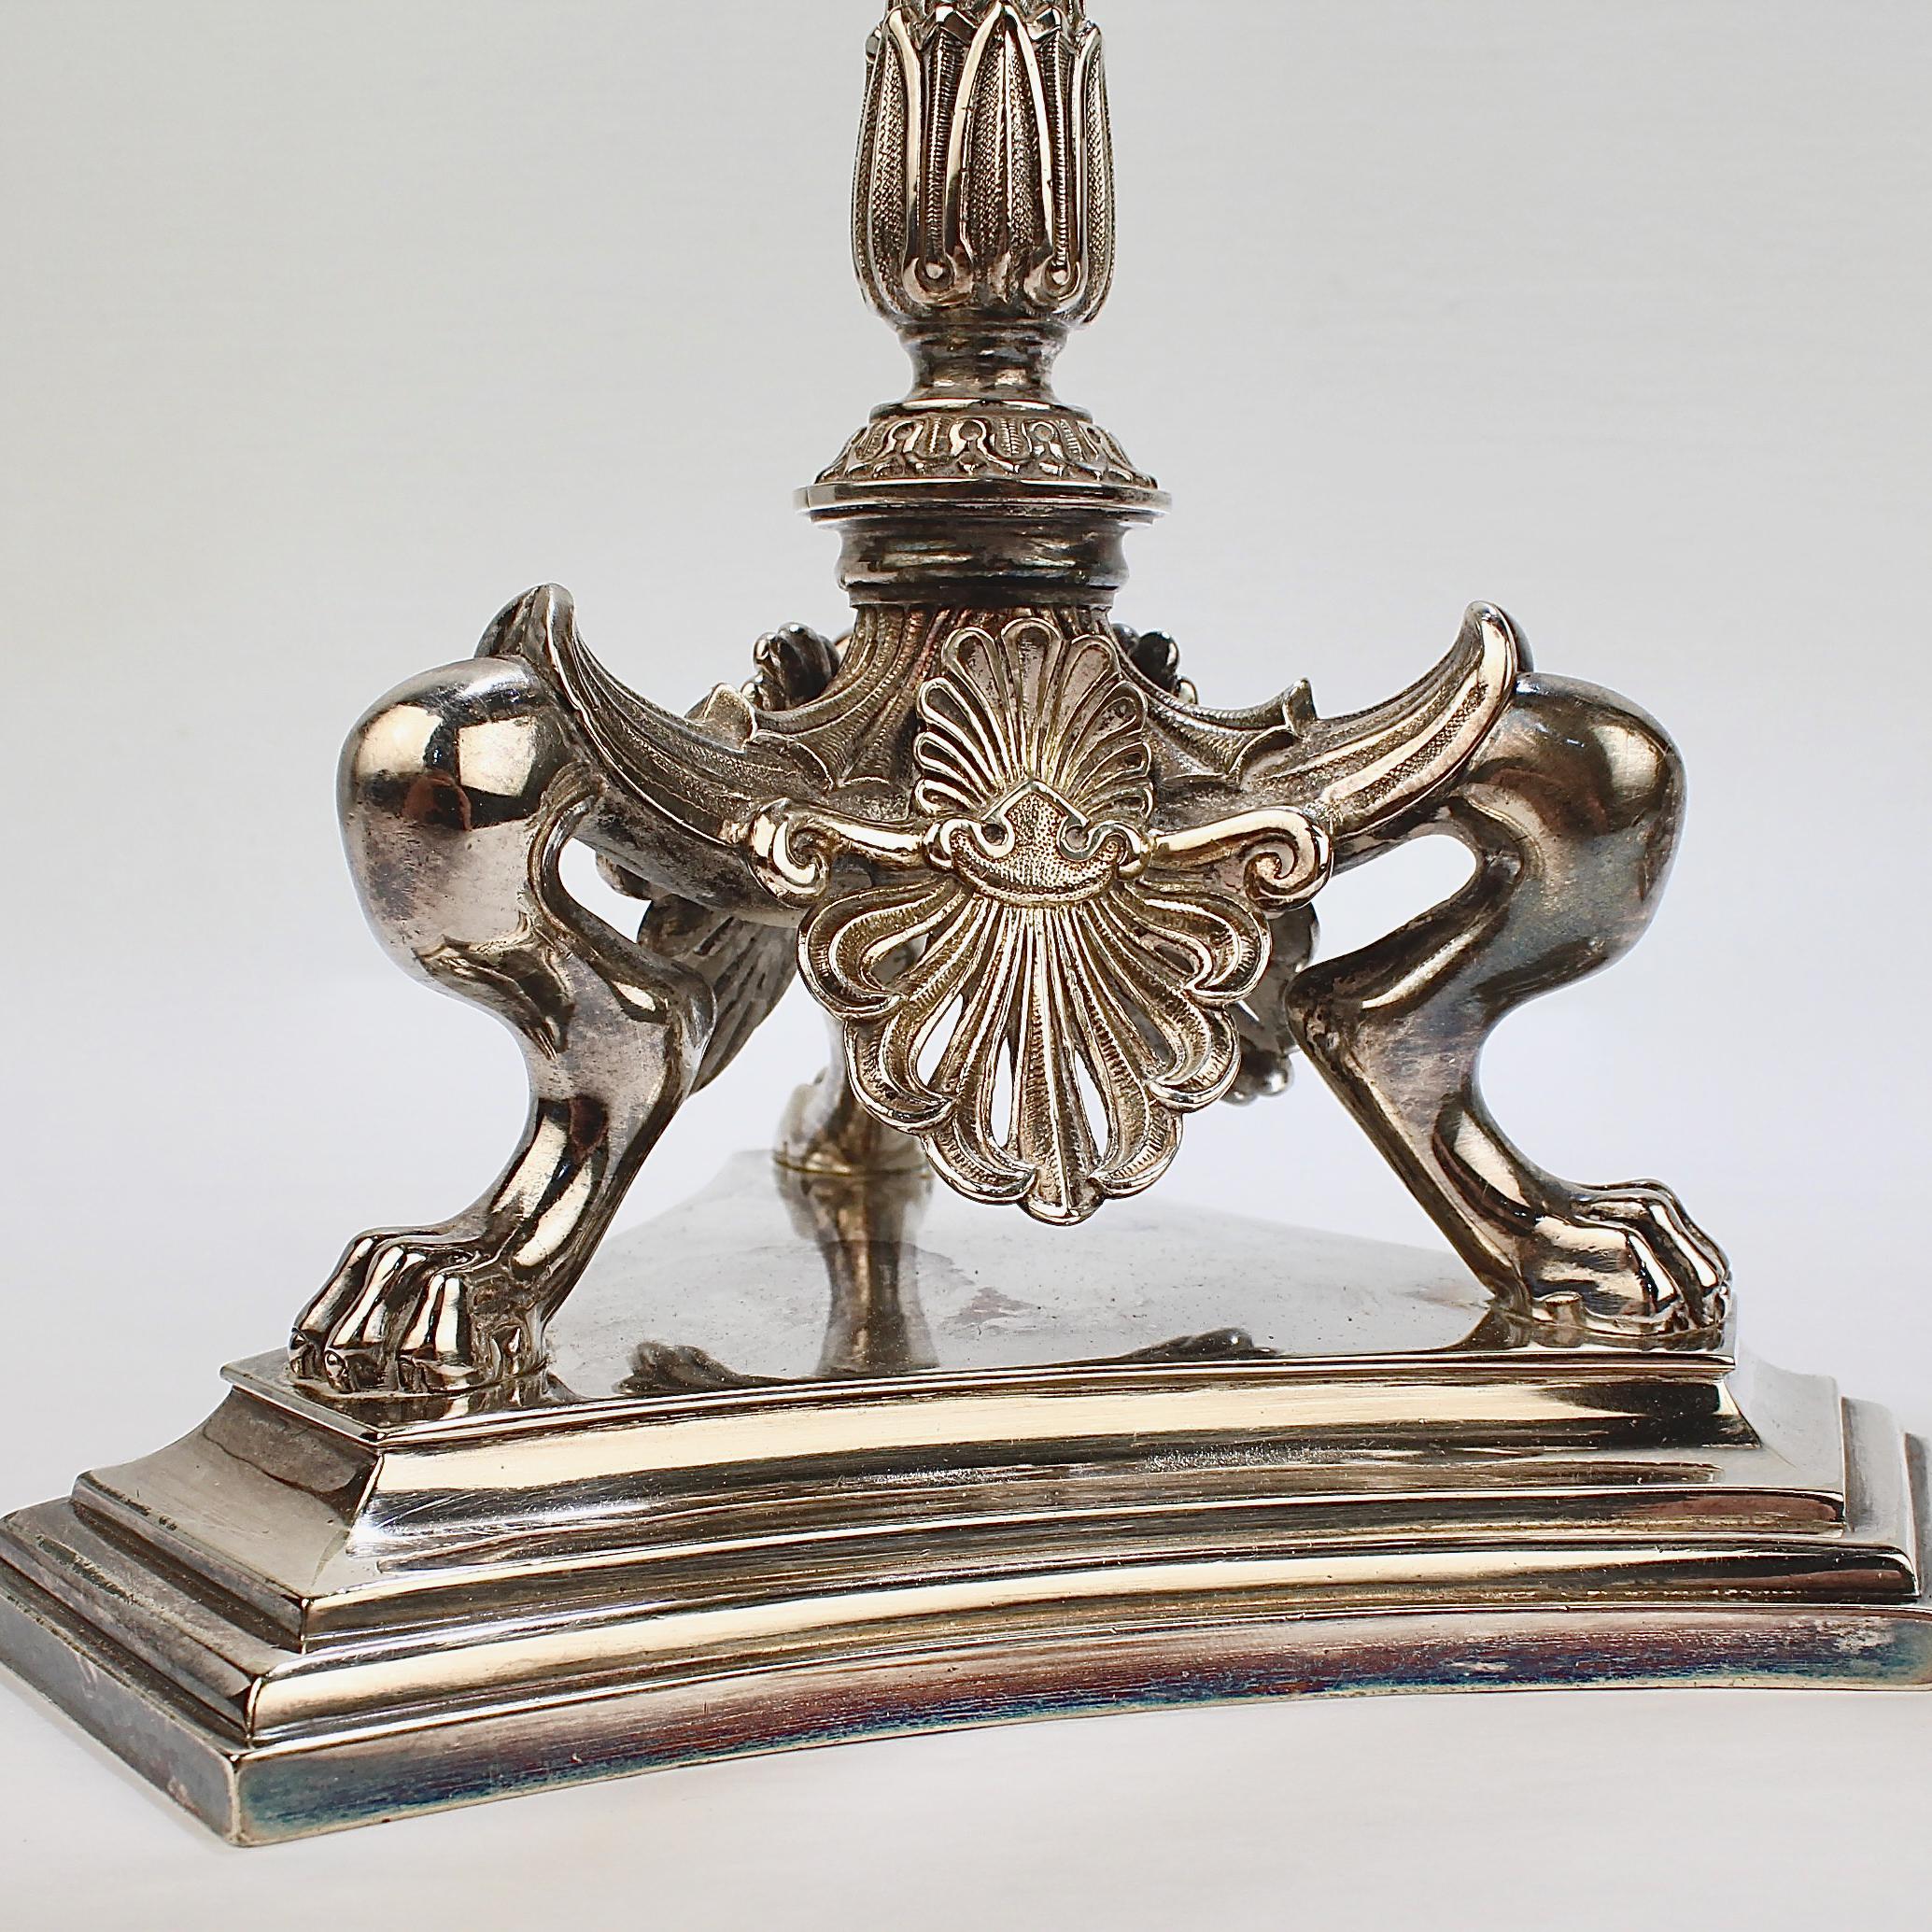 Pair of Elkington & Co Neoclassical Revival Silver Plated Five-Light Candelabra For Sale 2